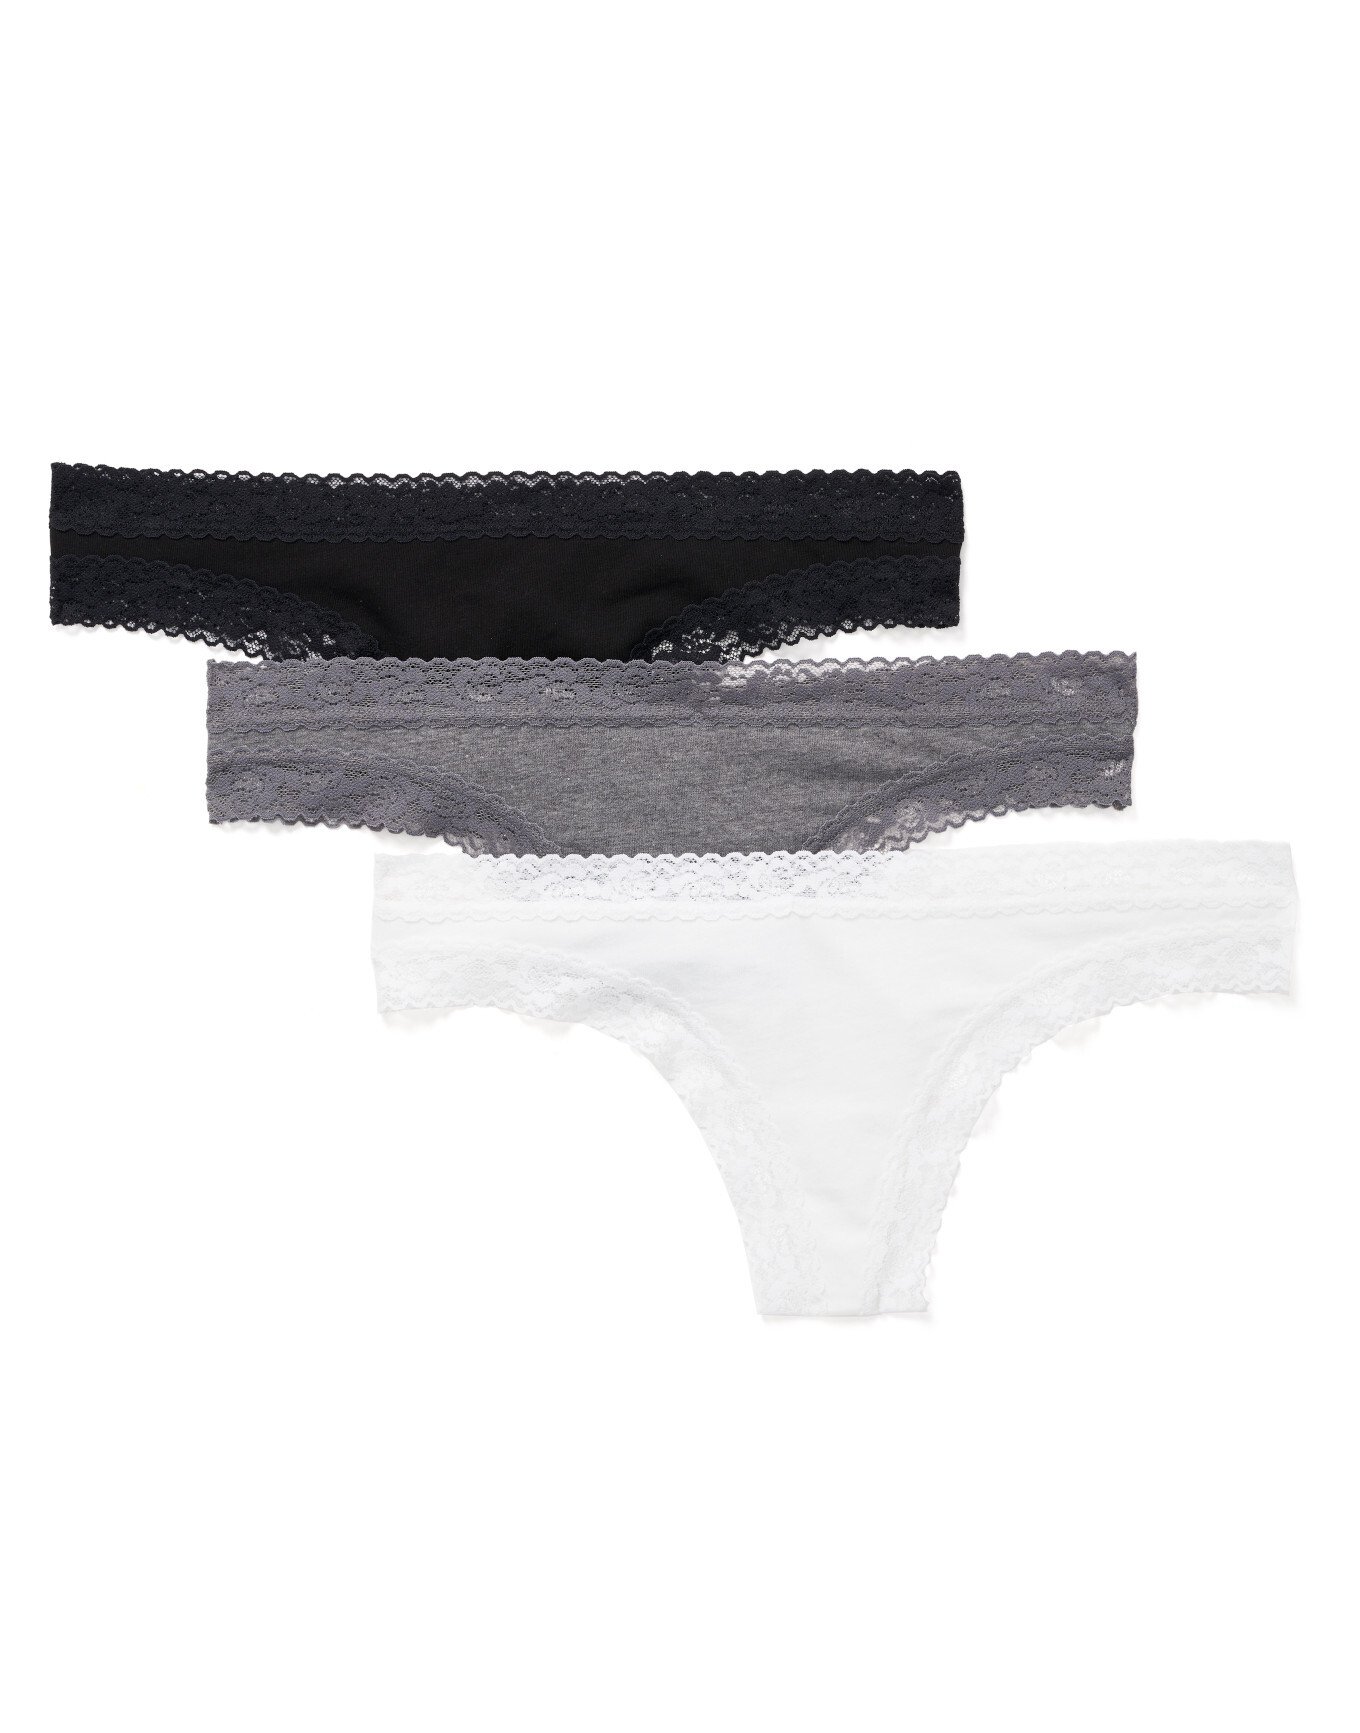 Passion - Panties with Easy Access 'Violante Thong', black